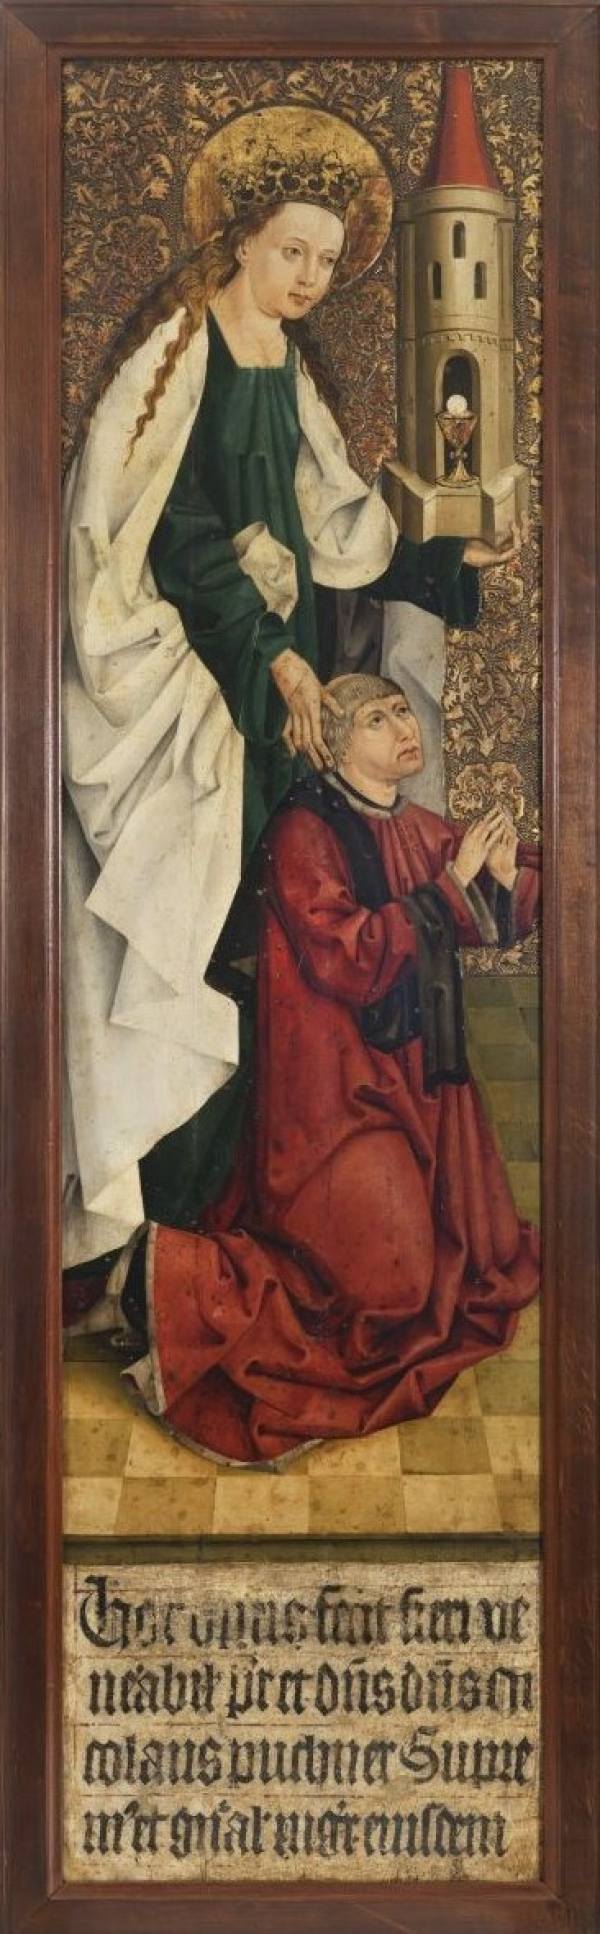 Master of the Altarpiece of the Knights of the Cross with the Red Star, Altarpiece of Nicholas Puchner, Grand Master of the Knights of the Cross with the Red Star, called Puchner Ark, 1482